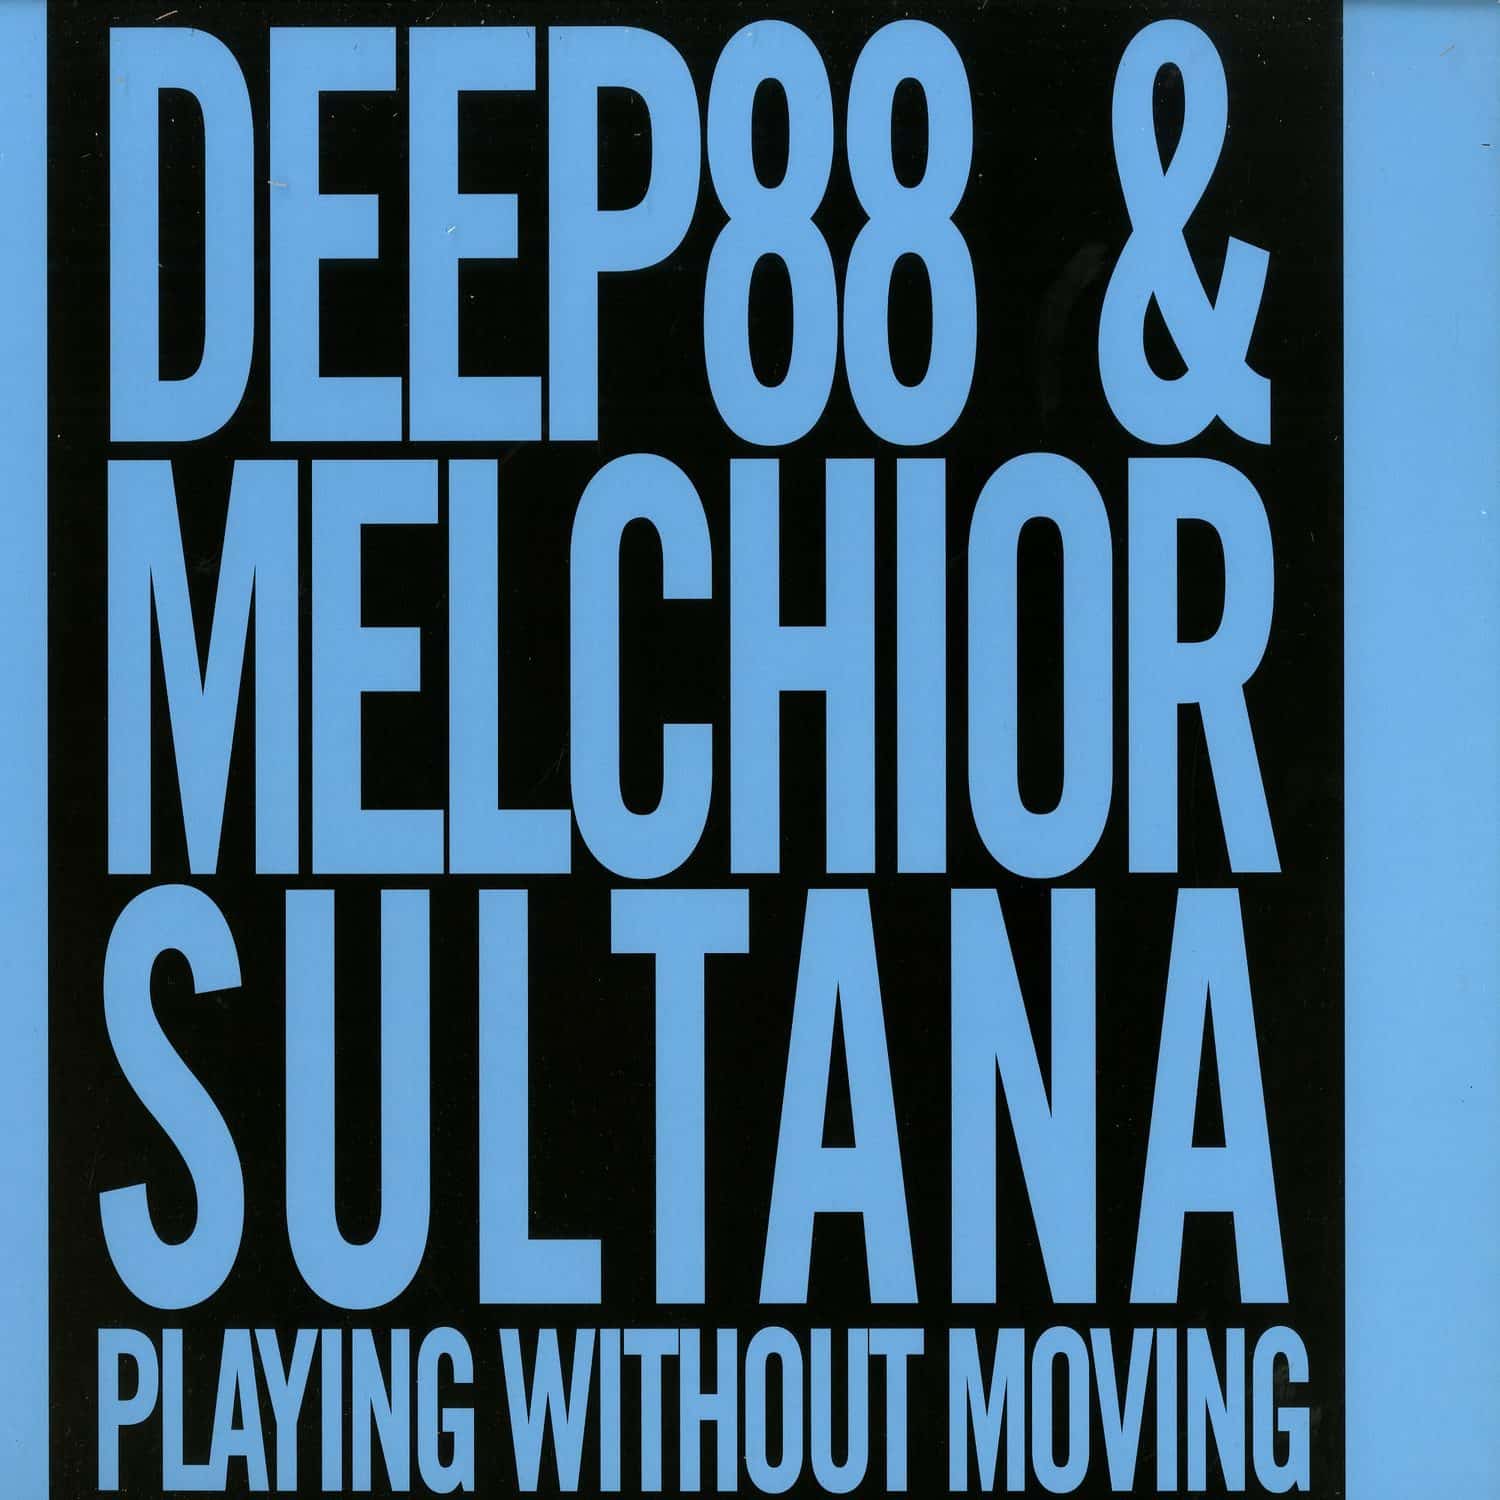 Deep88 & Melchior Sultana - PLAYING WITHOUT MOVING 